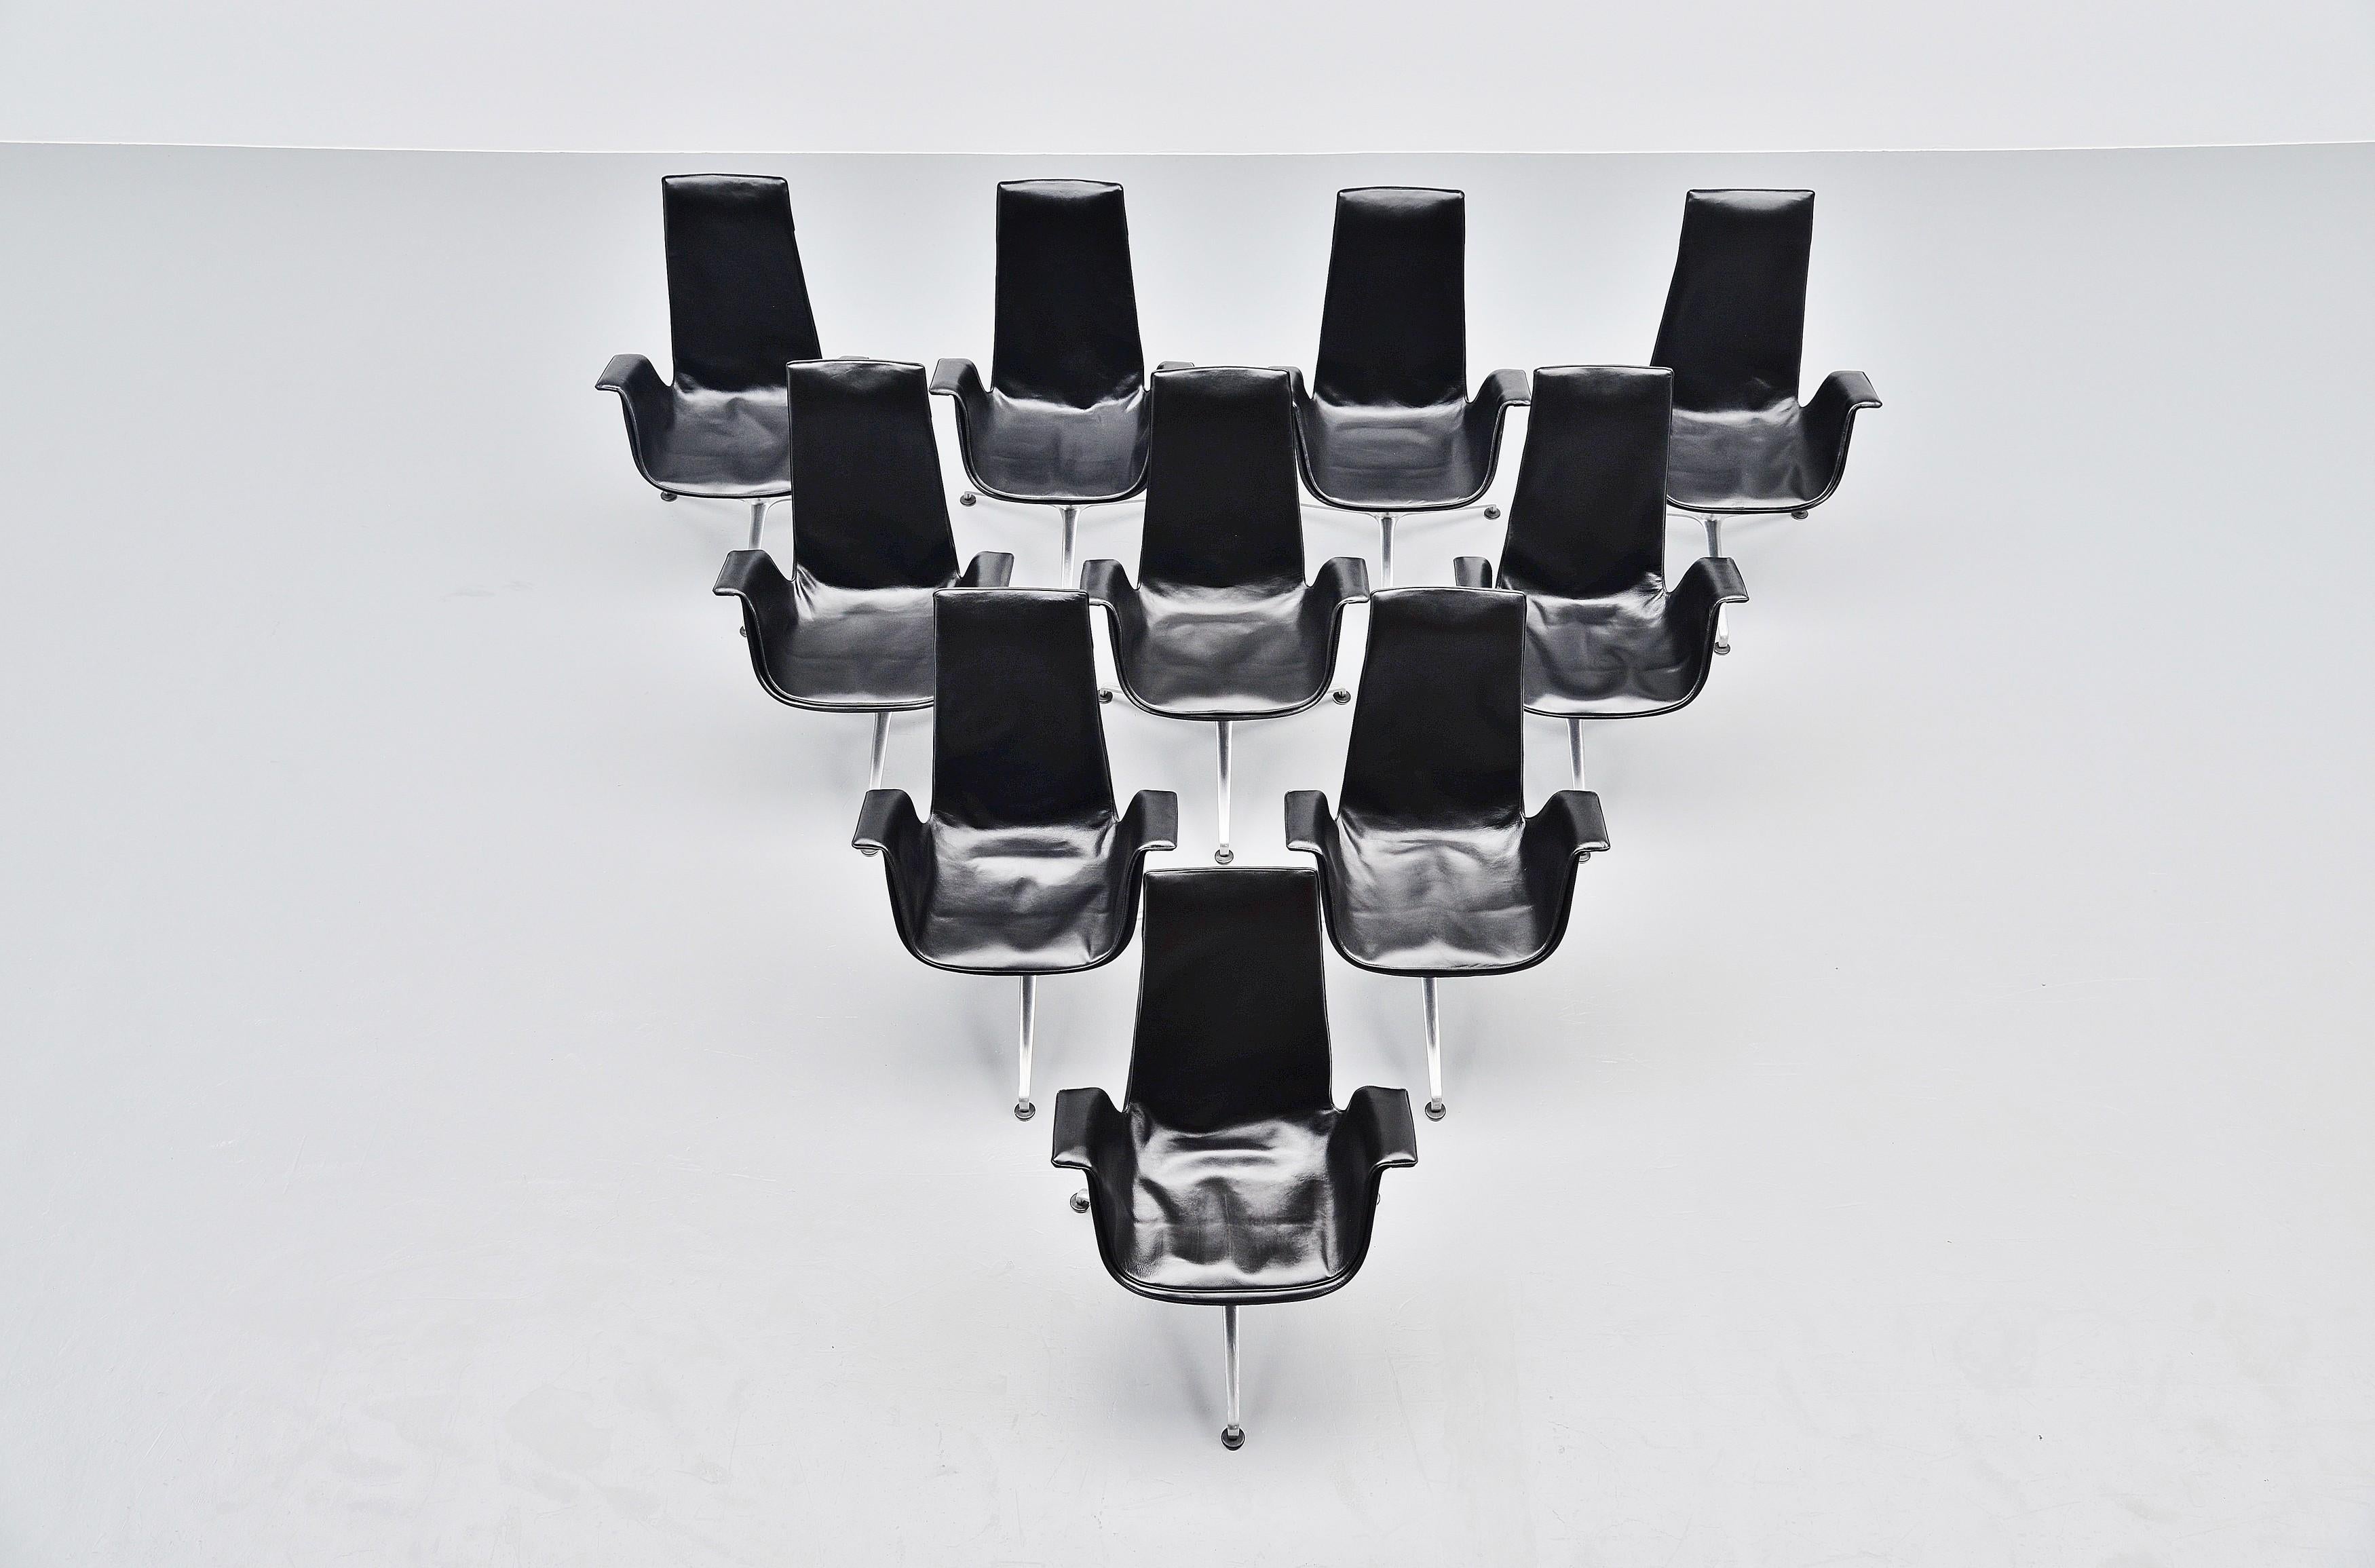 Very large set of high back executive chairs model FK6725 designed by Preben Fabricius and Jorgen Kastholm, manufactured by Kill International, Germany 1964. These so called bird chairs have recolored black leather seats so they look fantastic